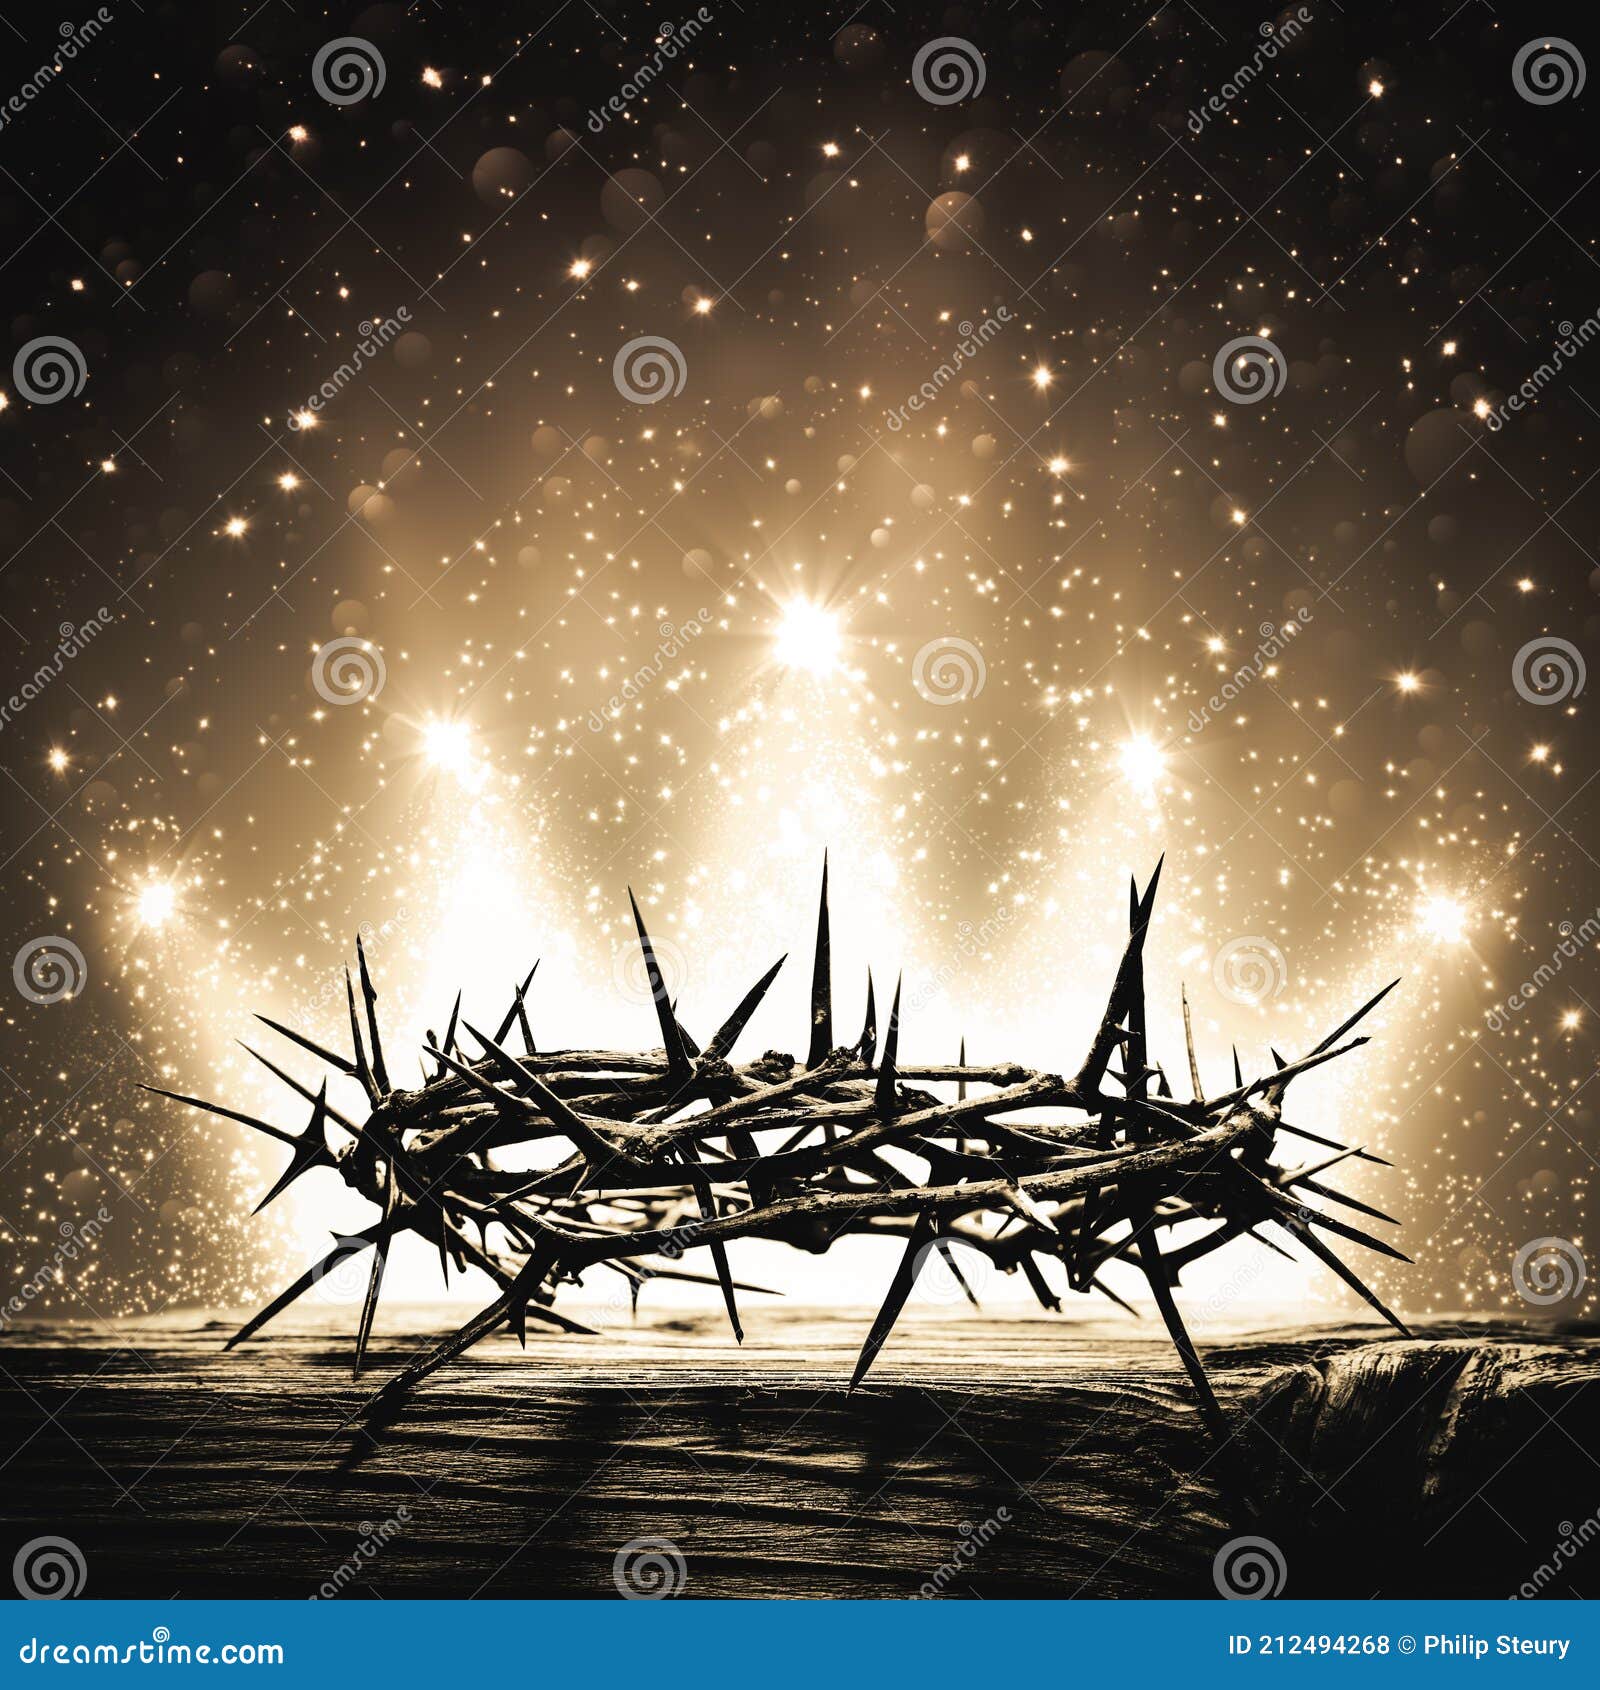 crown of thorns on wooden cross with bright sparkling crown of light in background